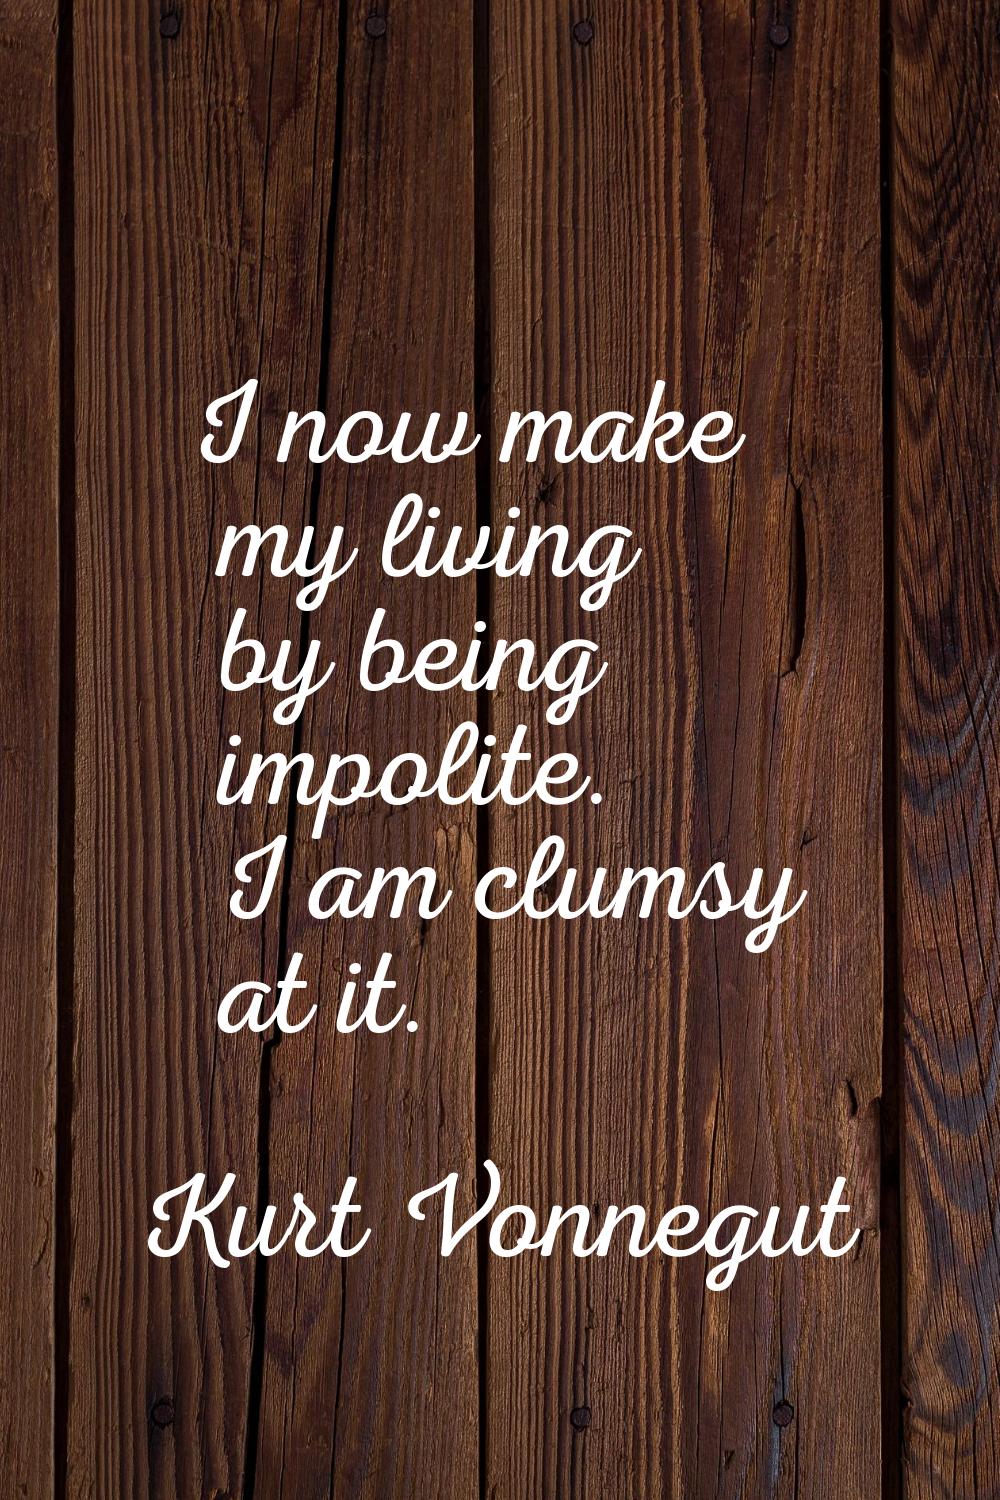 I now make my living by being impolite. I am clumsy at it.